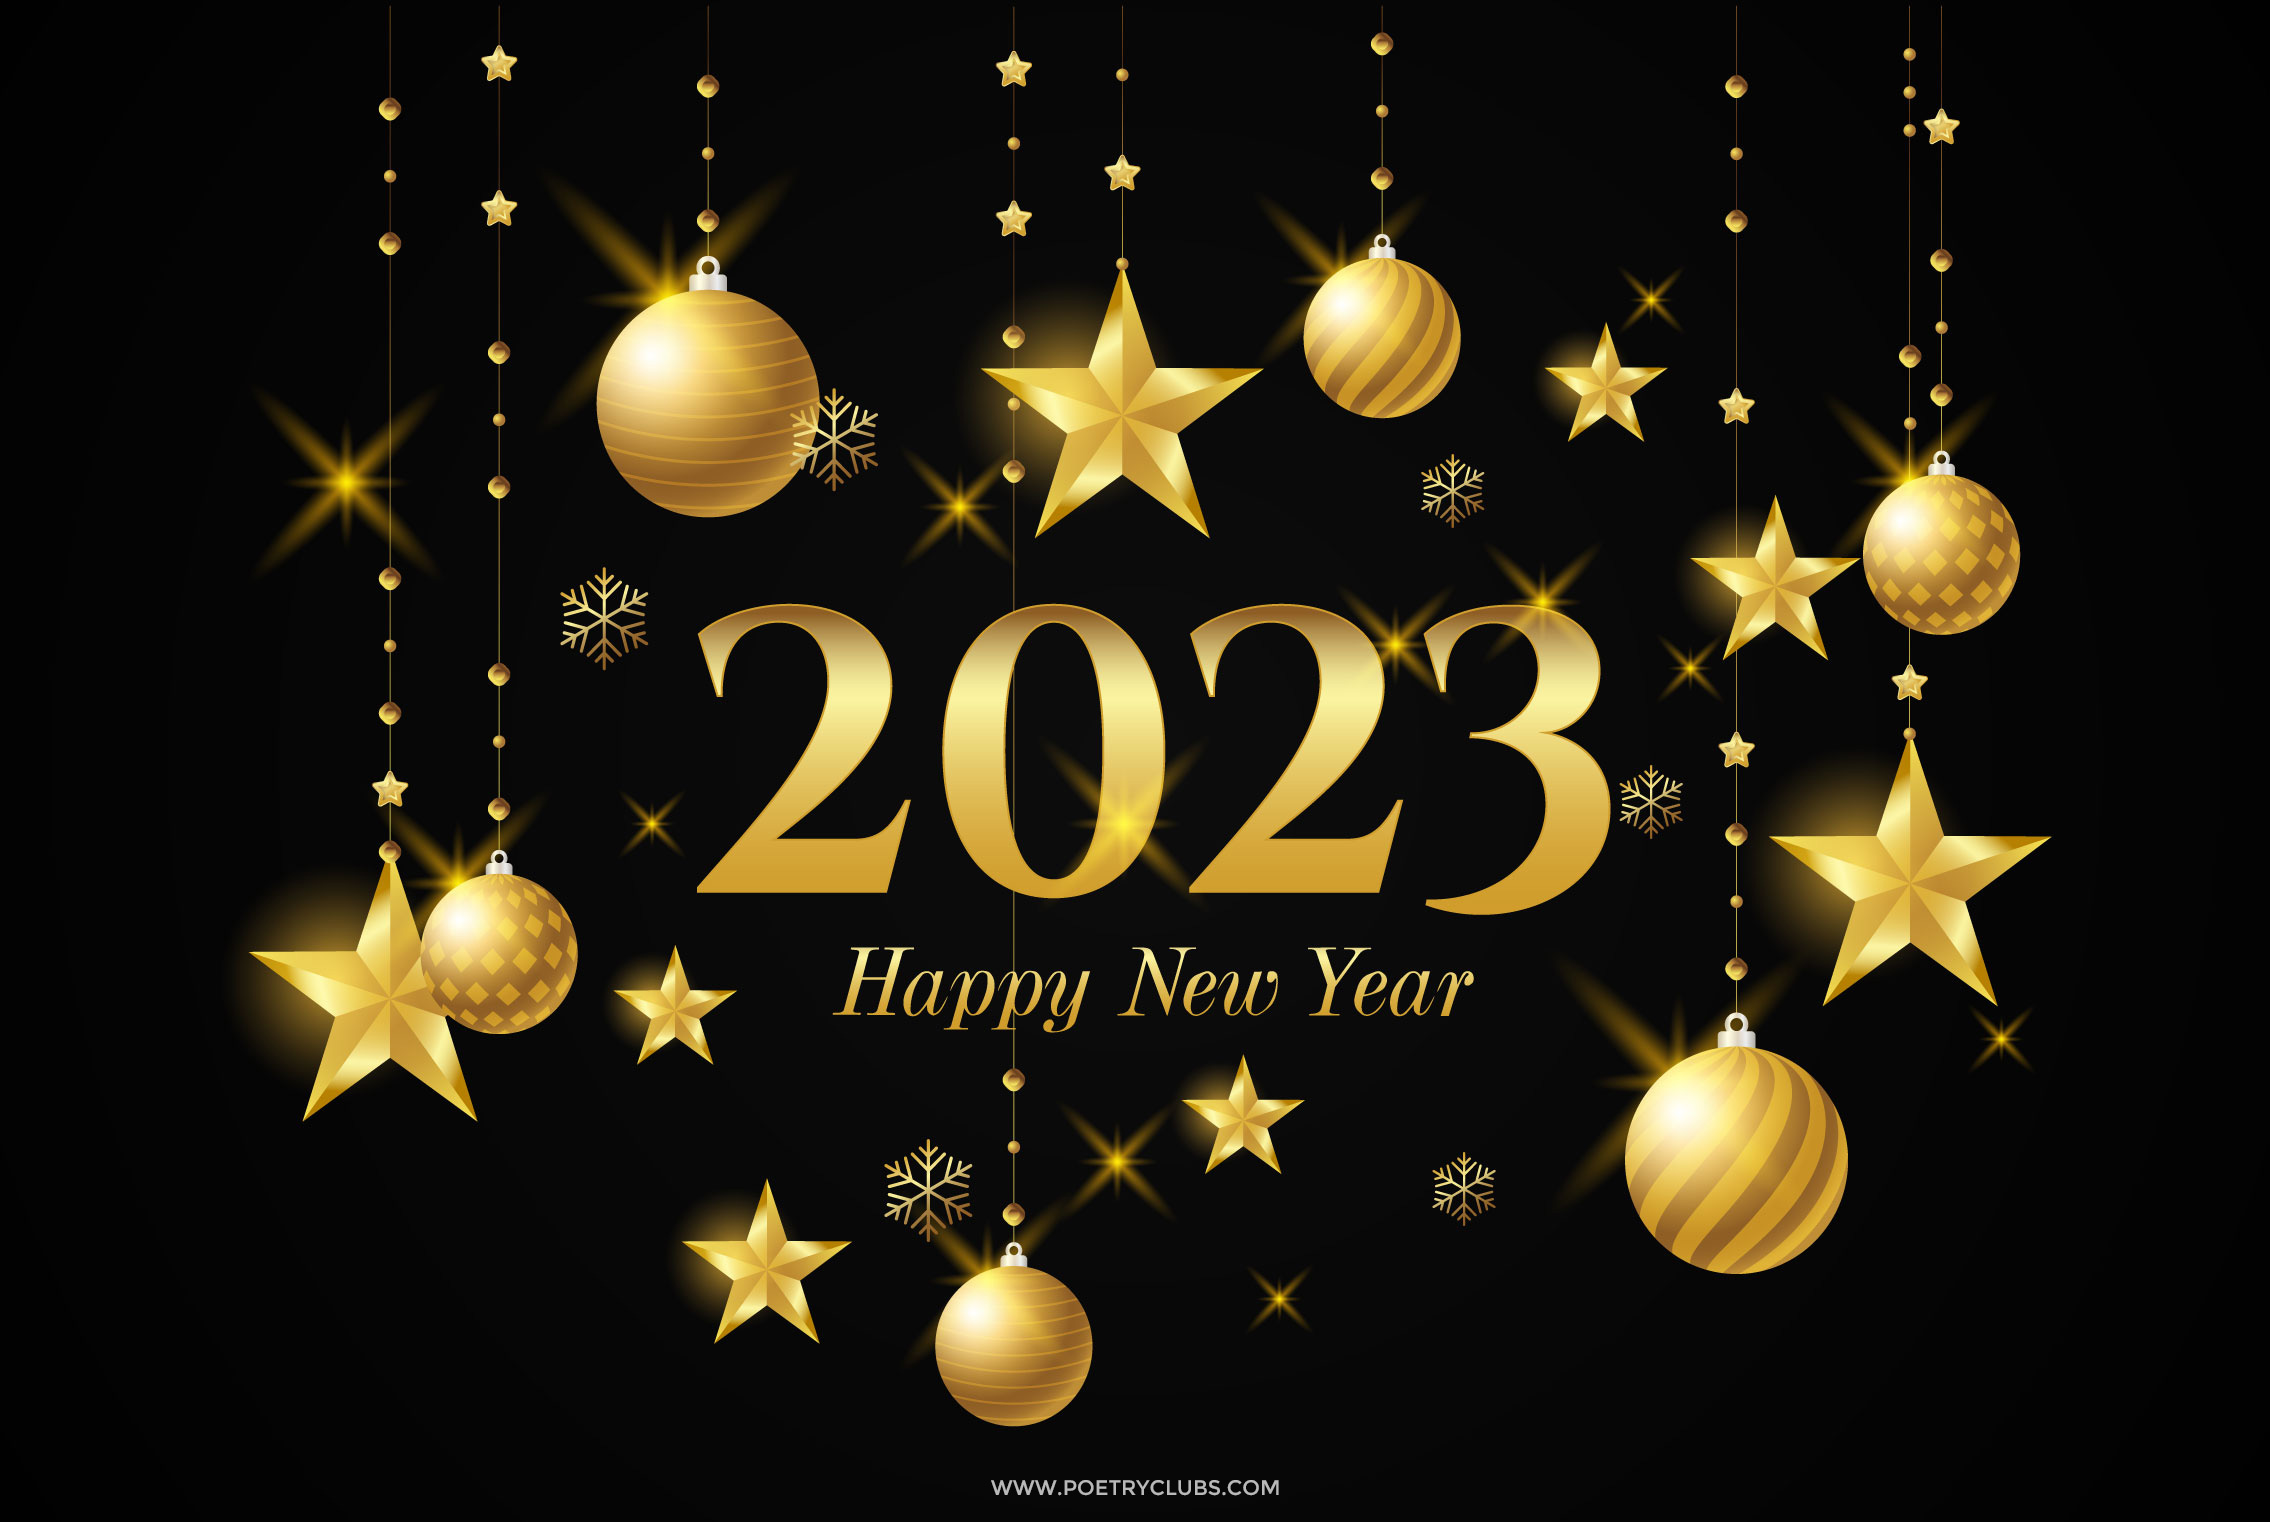 Happy New Year 2023 Wallpaper HD. New Year 2023 Image Download